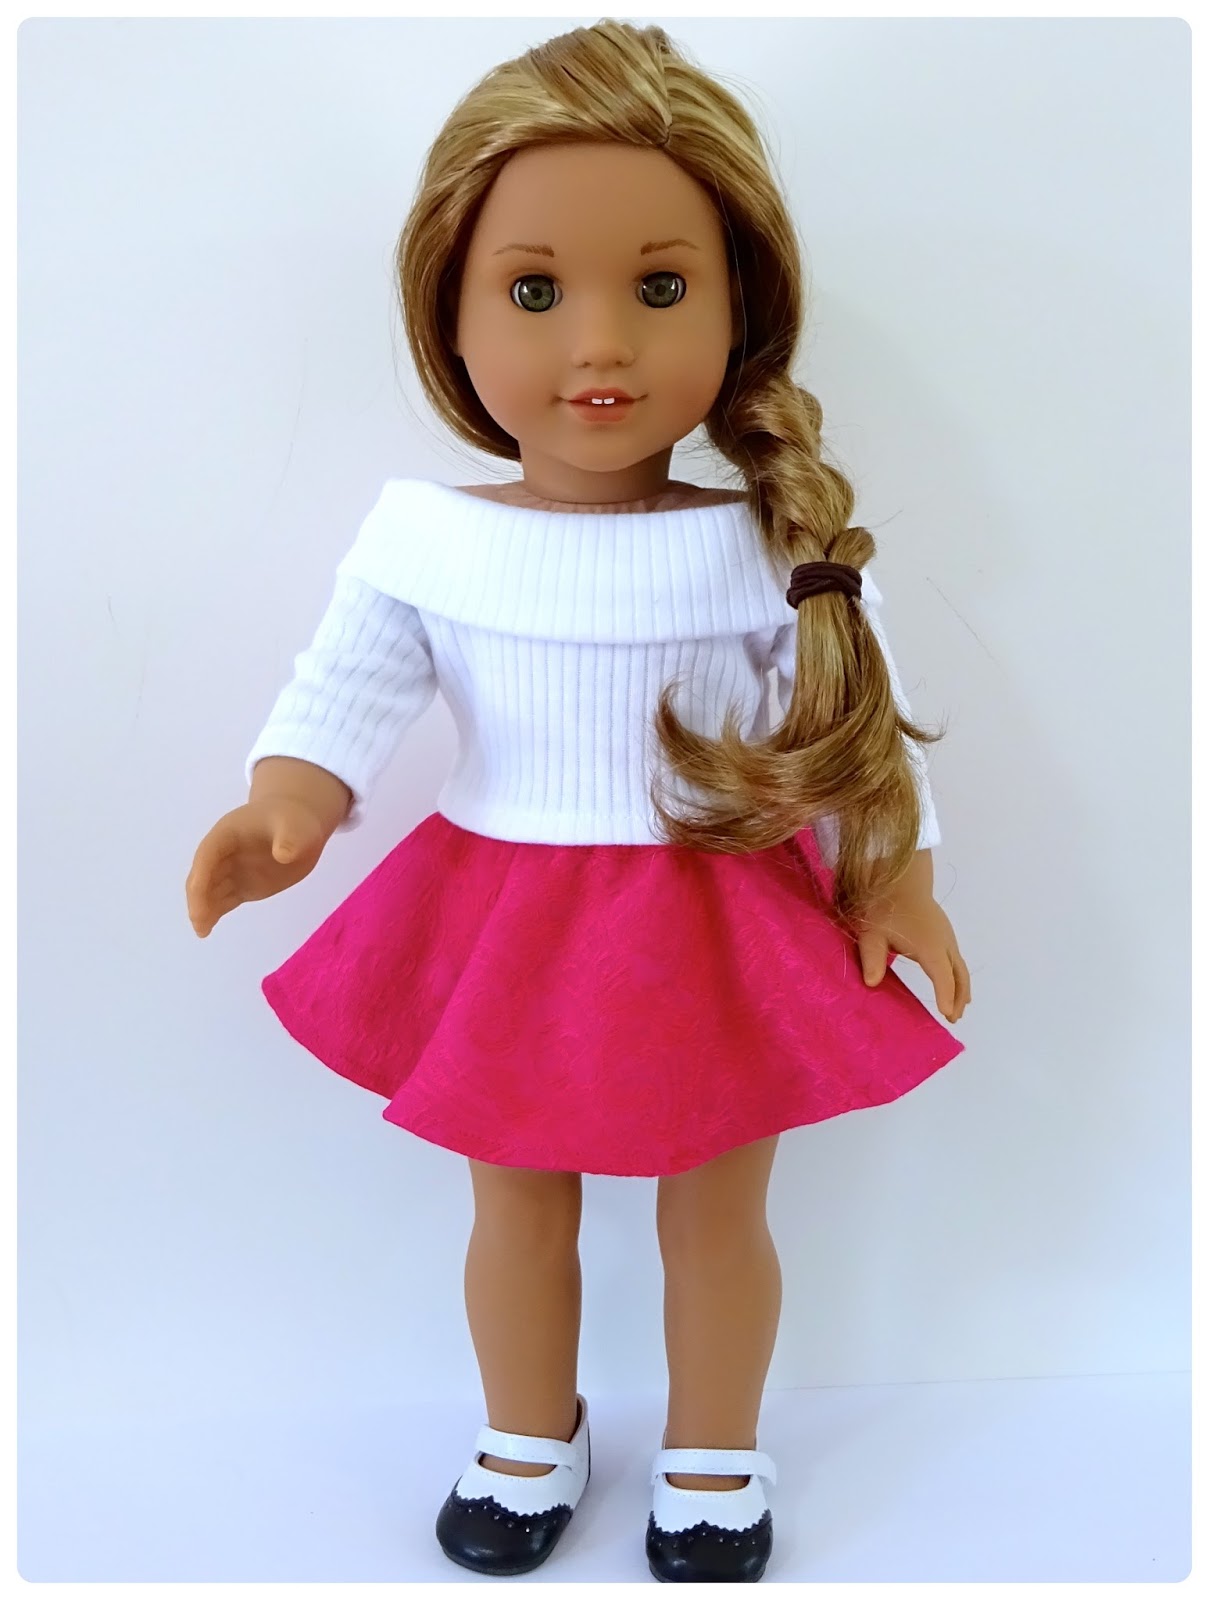 Doll Clothes Patterns by Valspierssews: Skater Skirt Doll Clothes ...